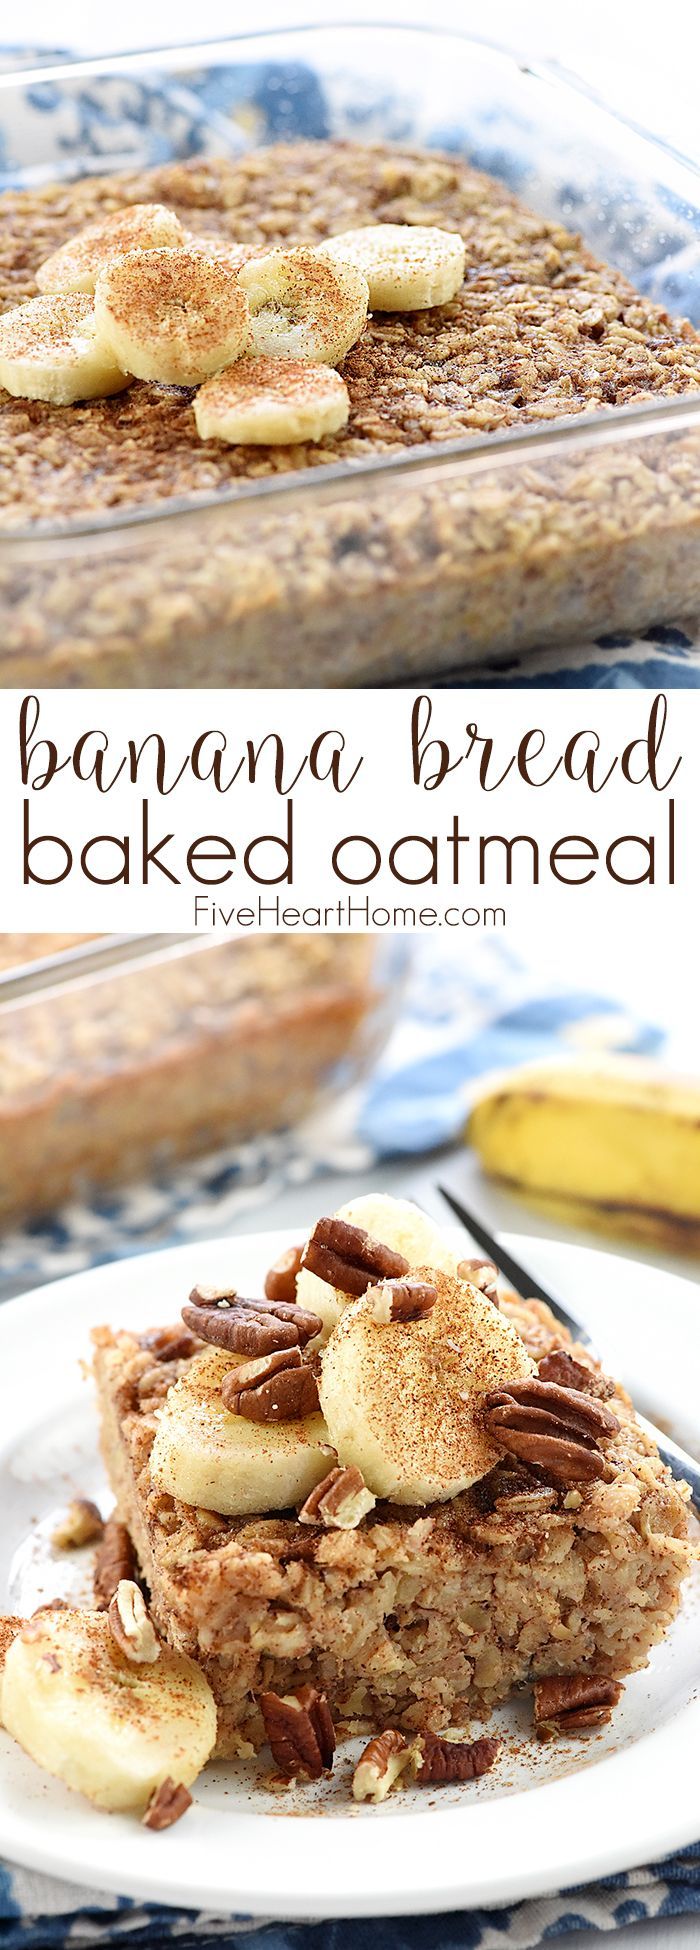 Banana Bread Baked Oatmeal ~ boasts the delicious flavor of banana bread, but it’s made with wholesome oats, pecans, and coconut